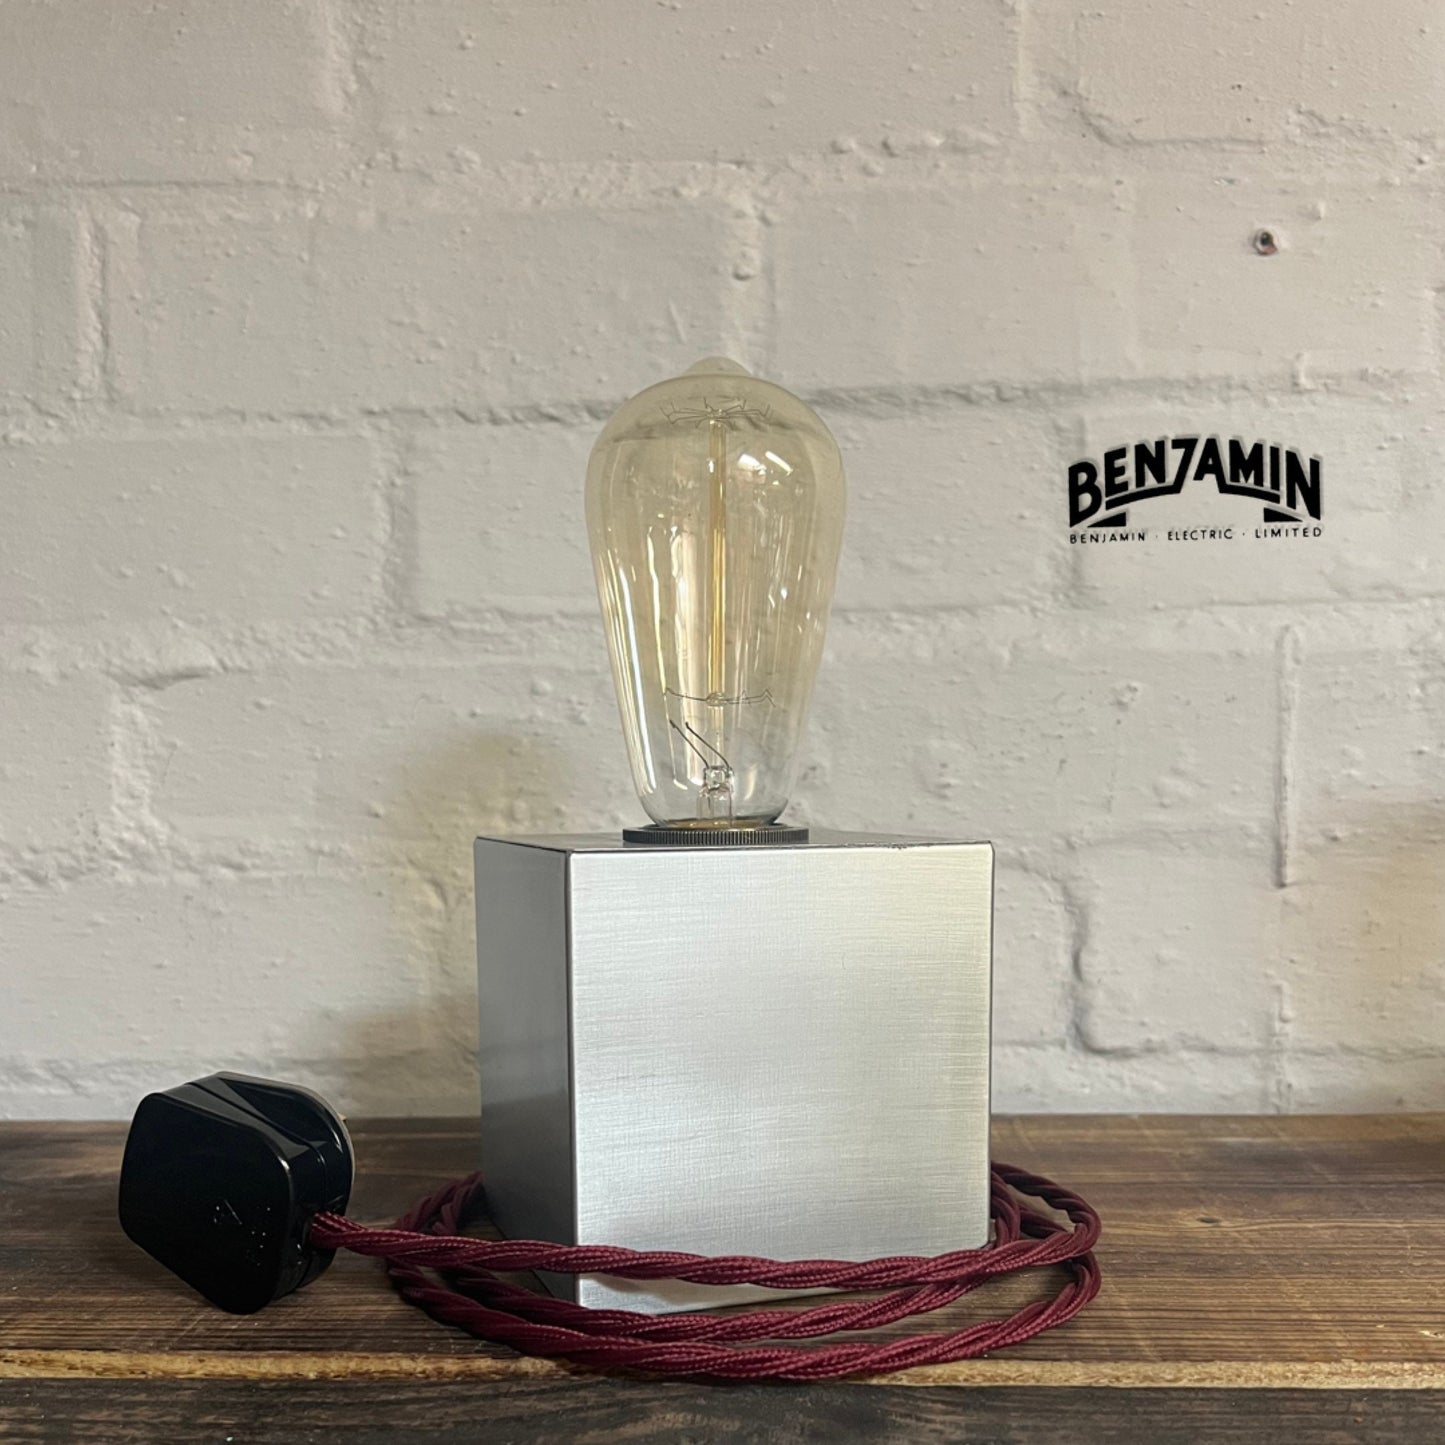 Square Pewter Bedside Lamp | Fabric Cable | Bedroom | Table Light | Vintage Retro 1 x Edison Filament Bulb